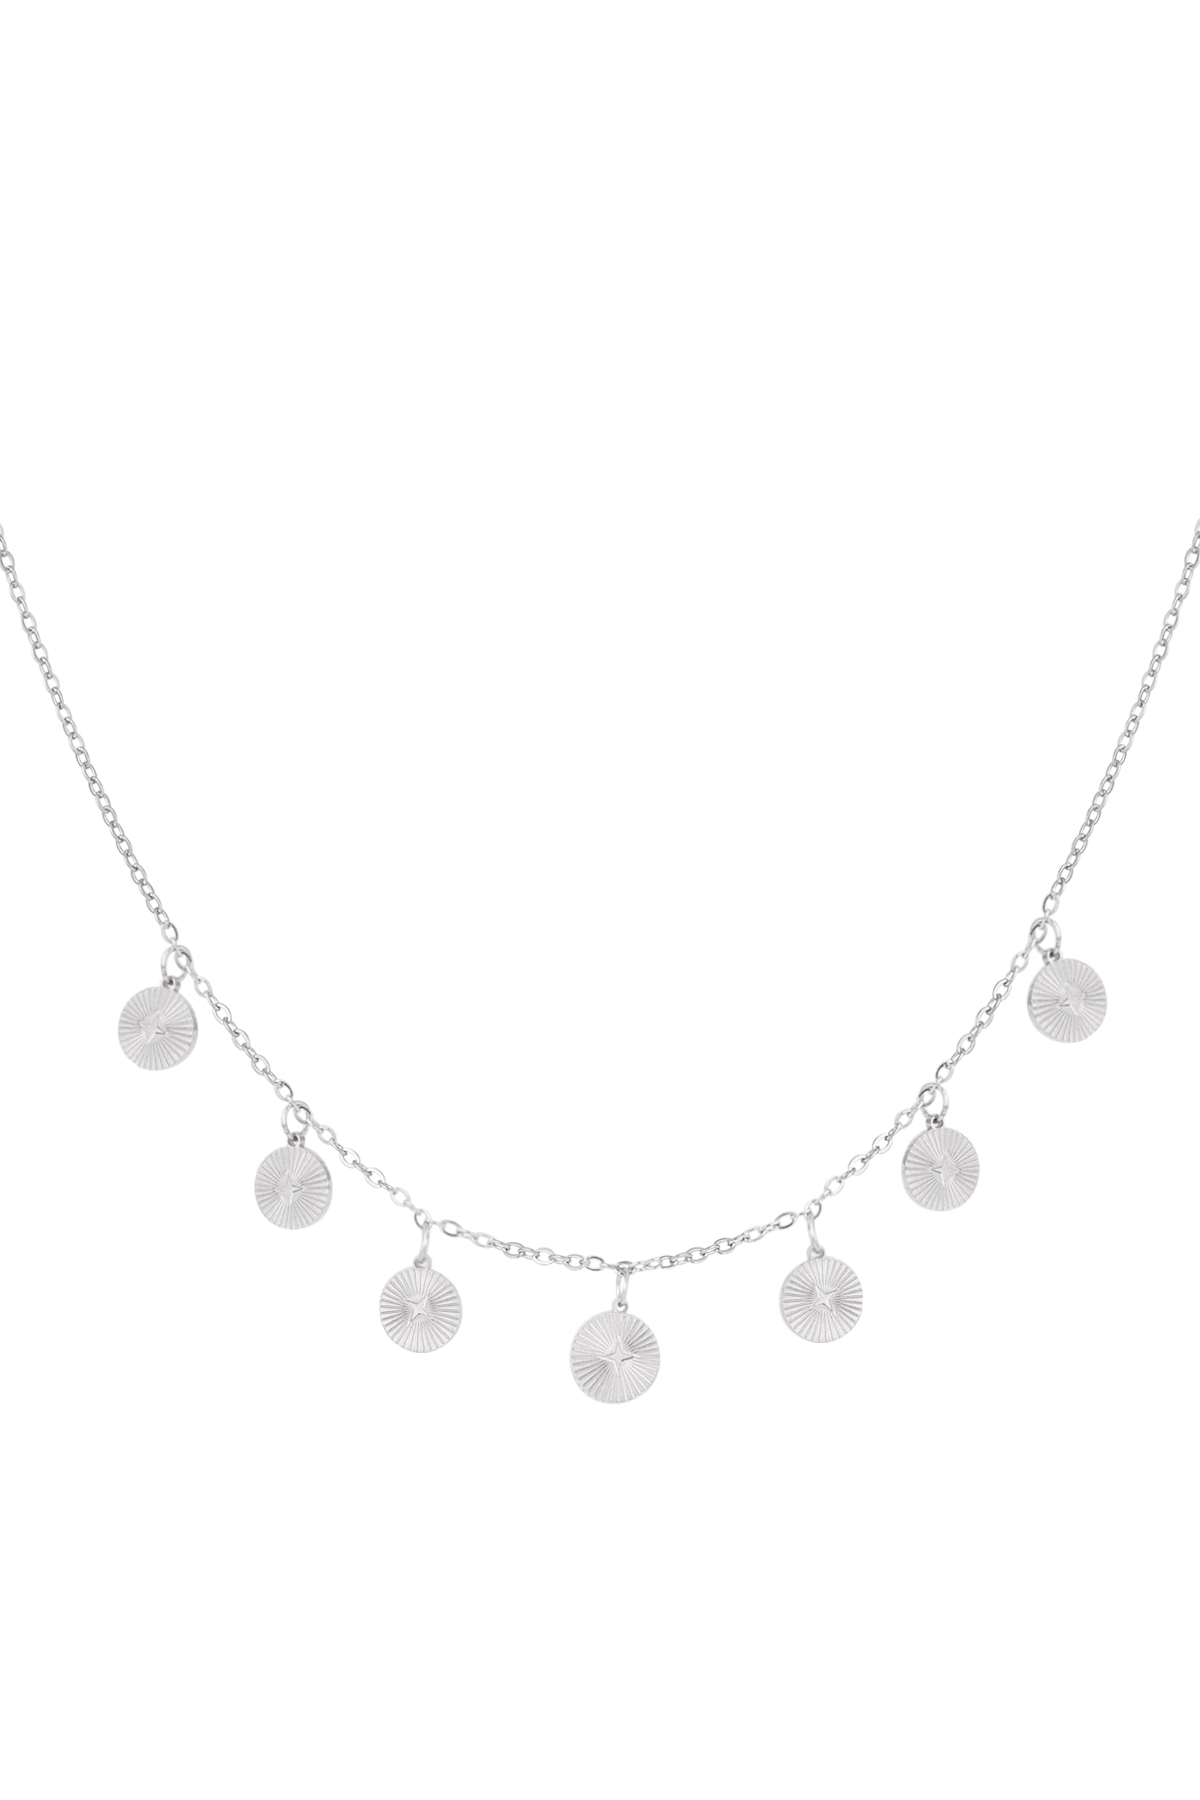 Necklace with coins - silver h5 